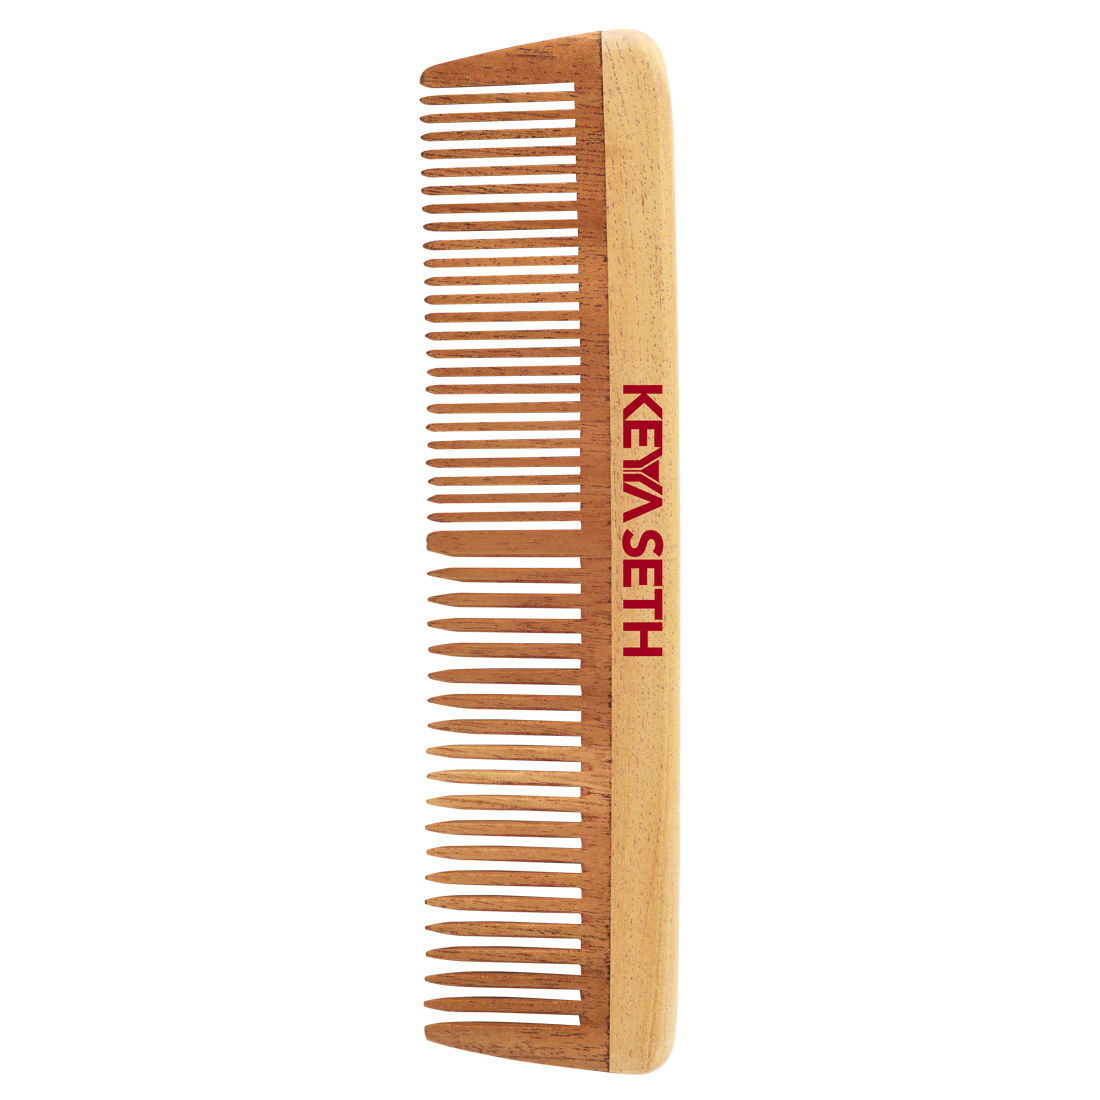 Keya Seth Neem Wooden Comb Wide Tooth For Hair Growth For Men & Women All Purpose - Medium